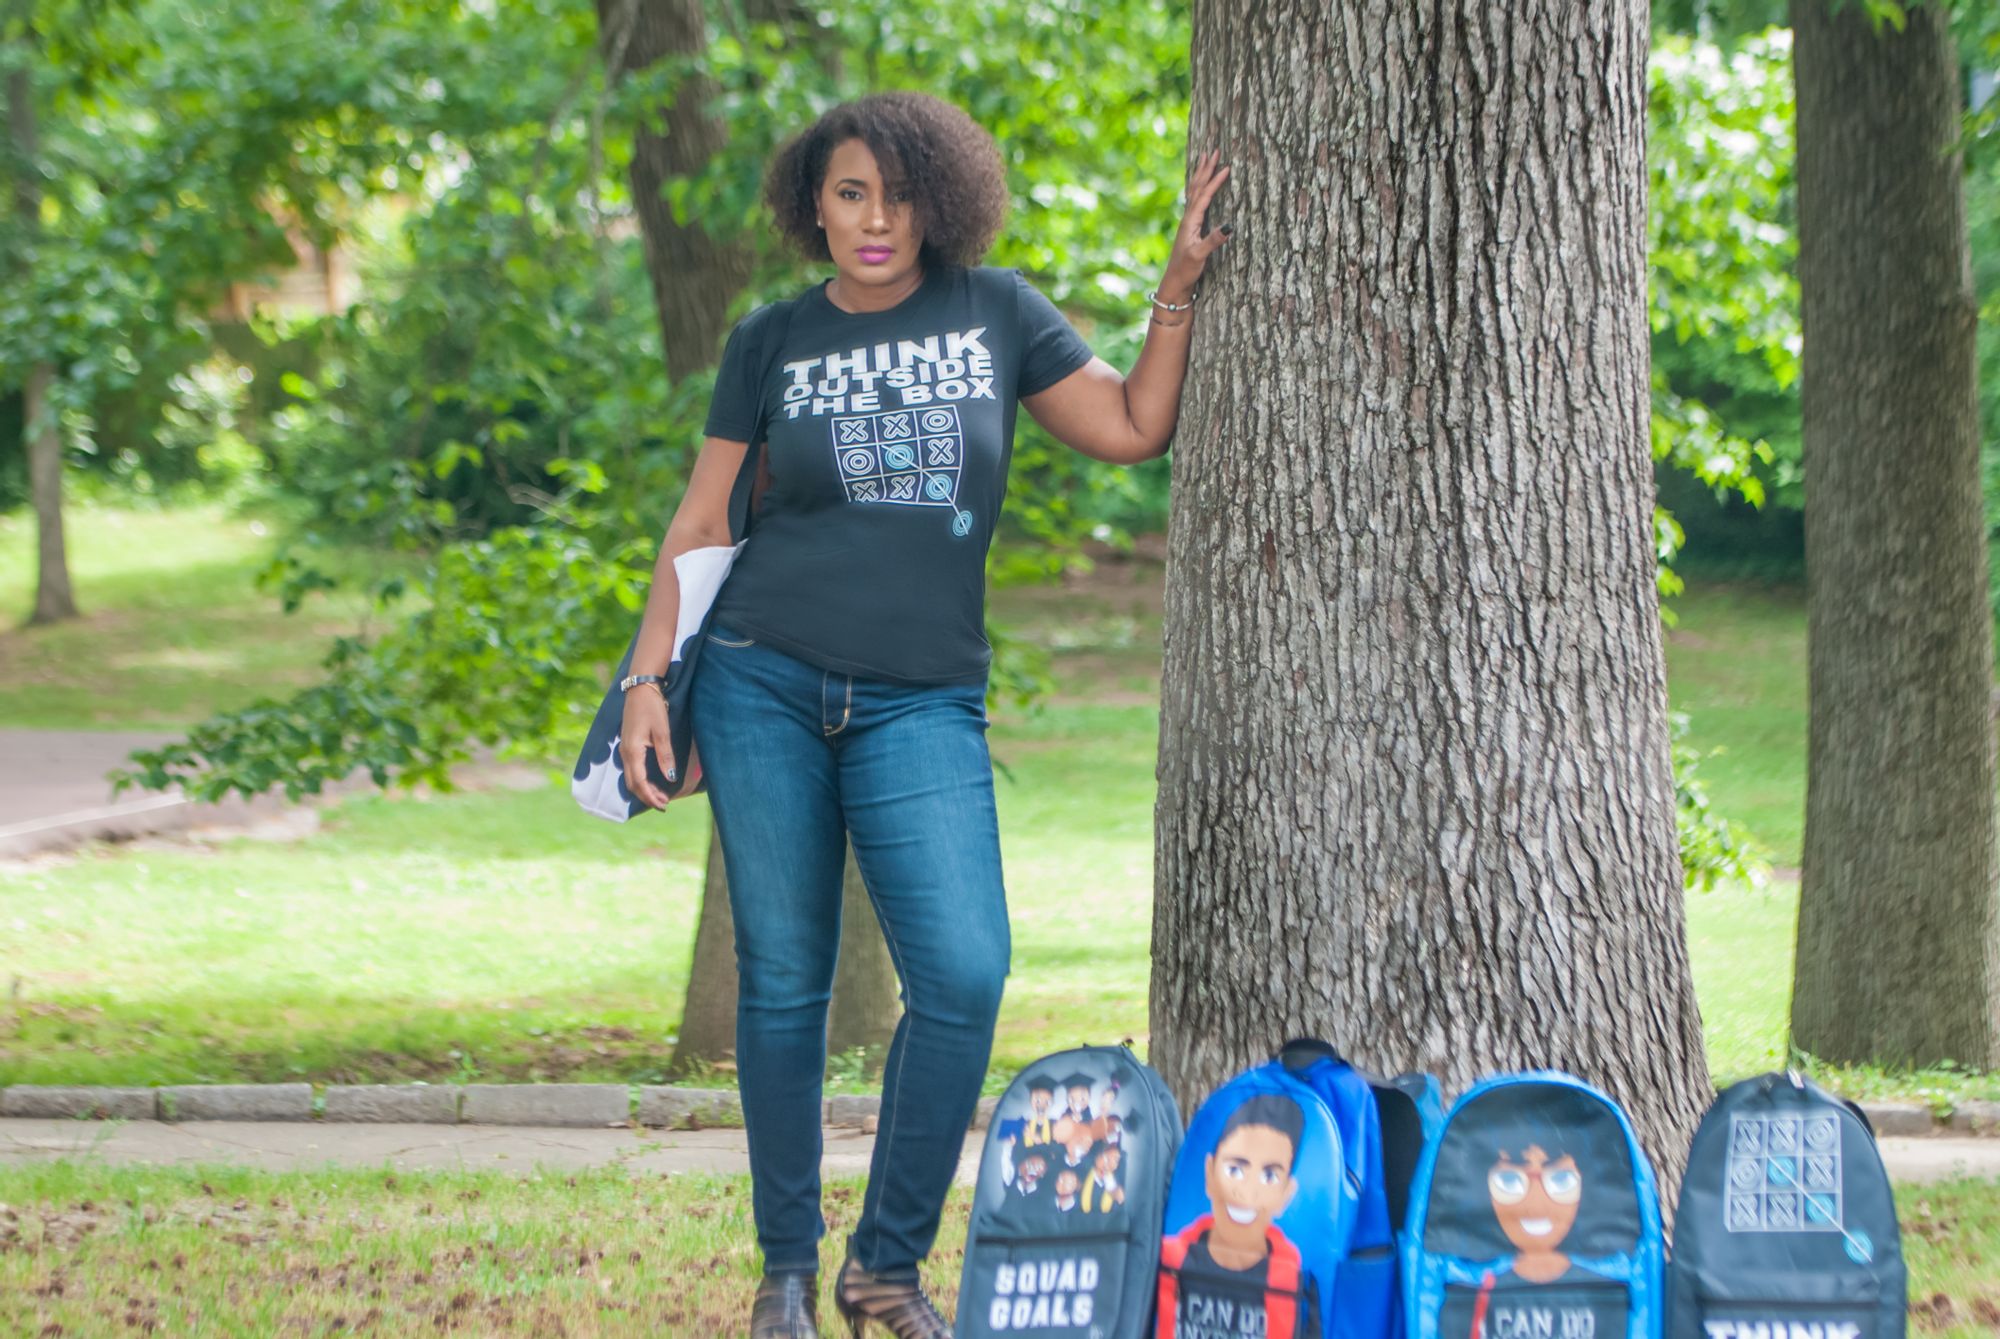 Representation Matters: How One Woman Is Empowering Black Children & Defying Stereotypes Through Backpacks